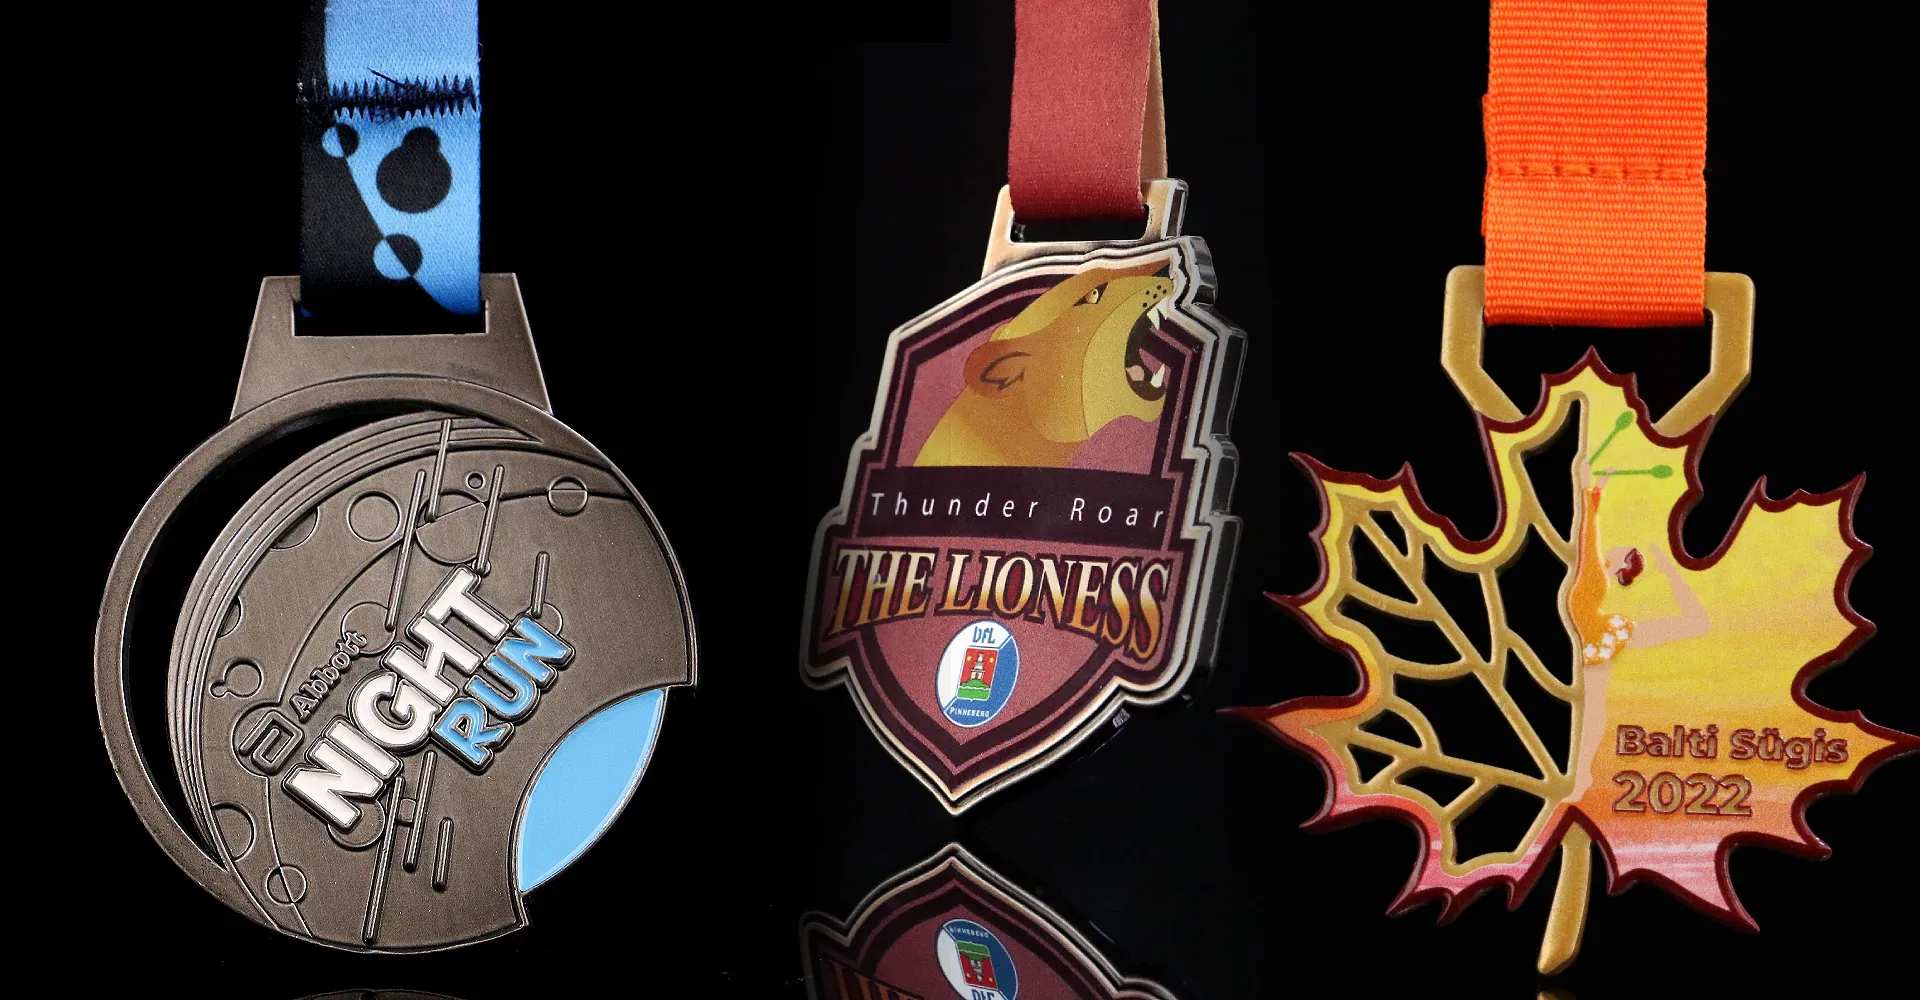 Three custom made medals made by Winmed